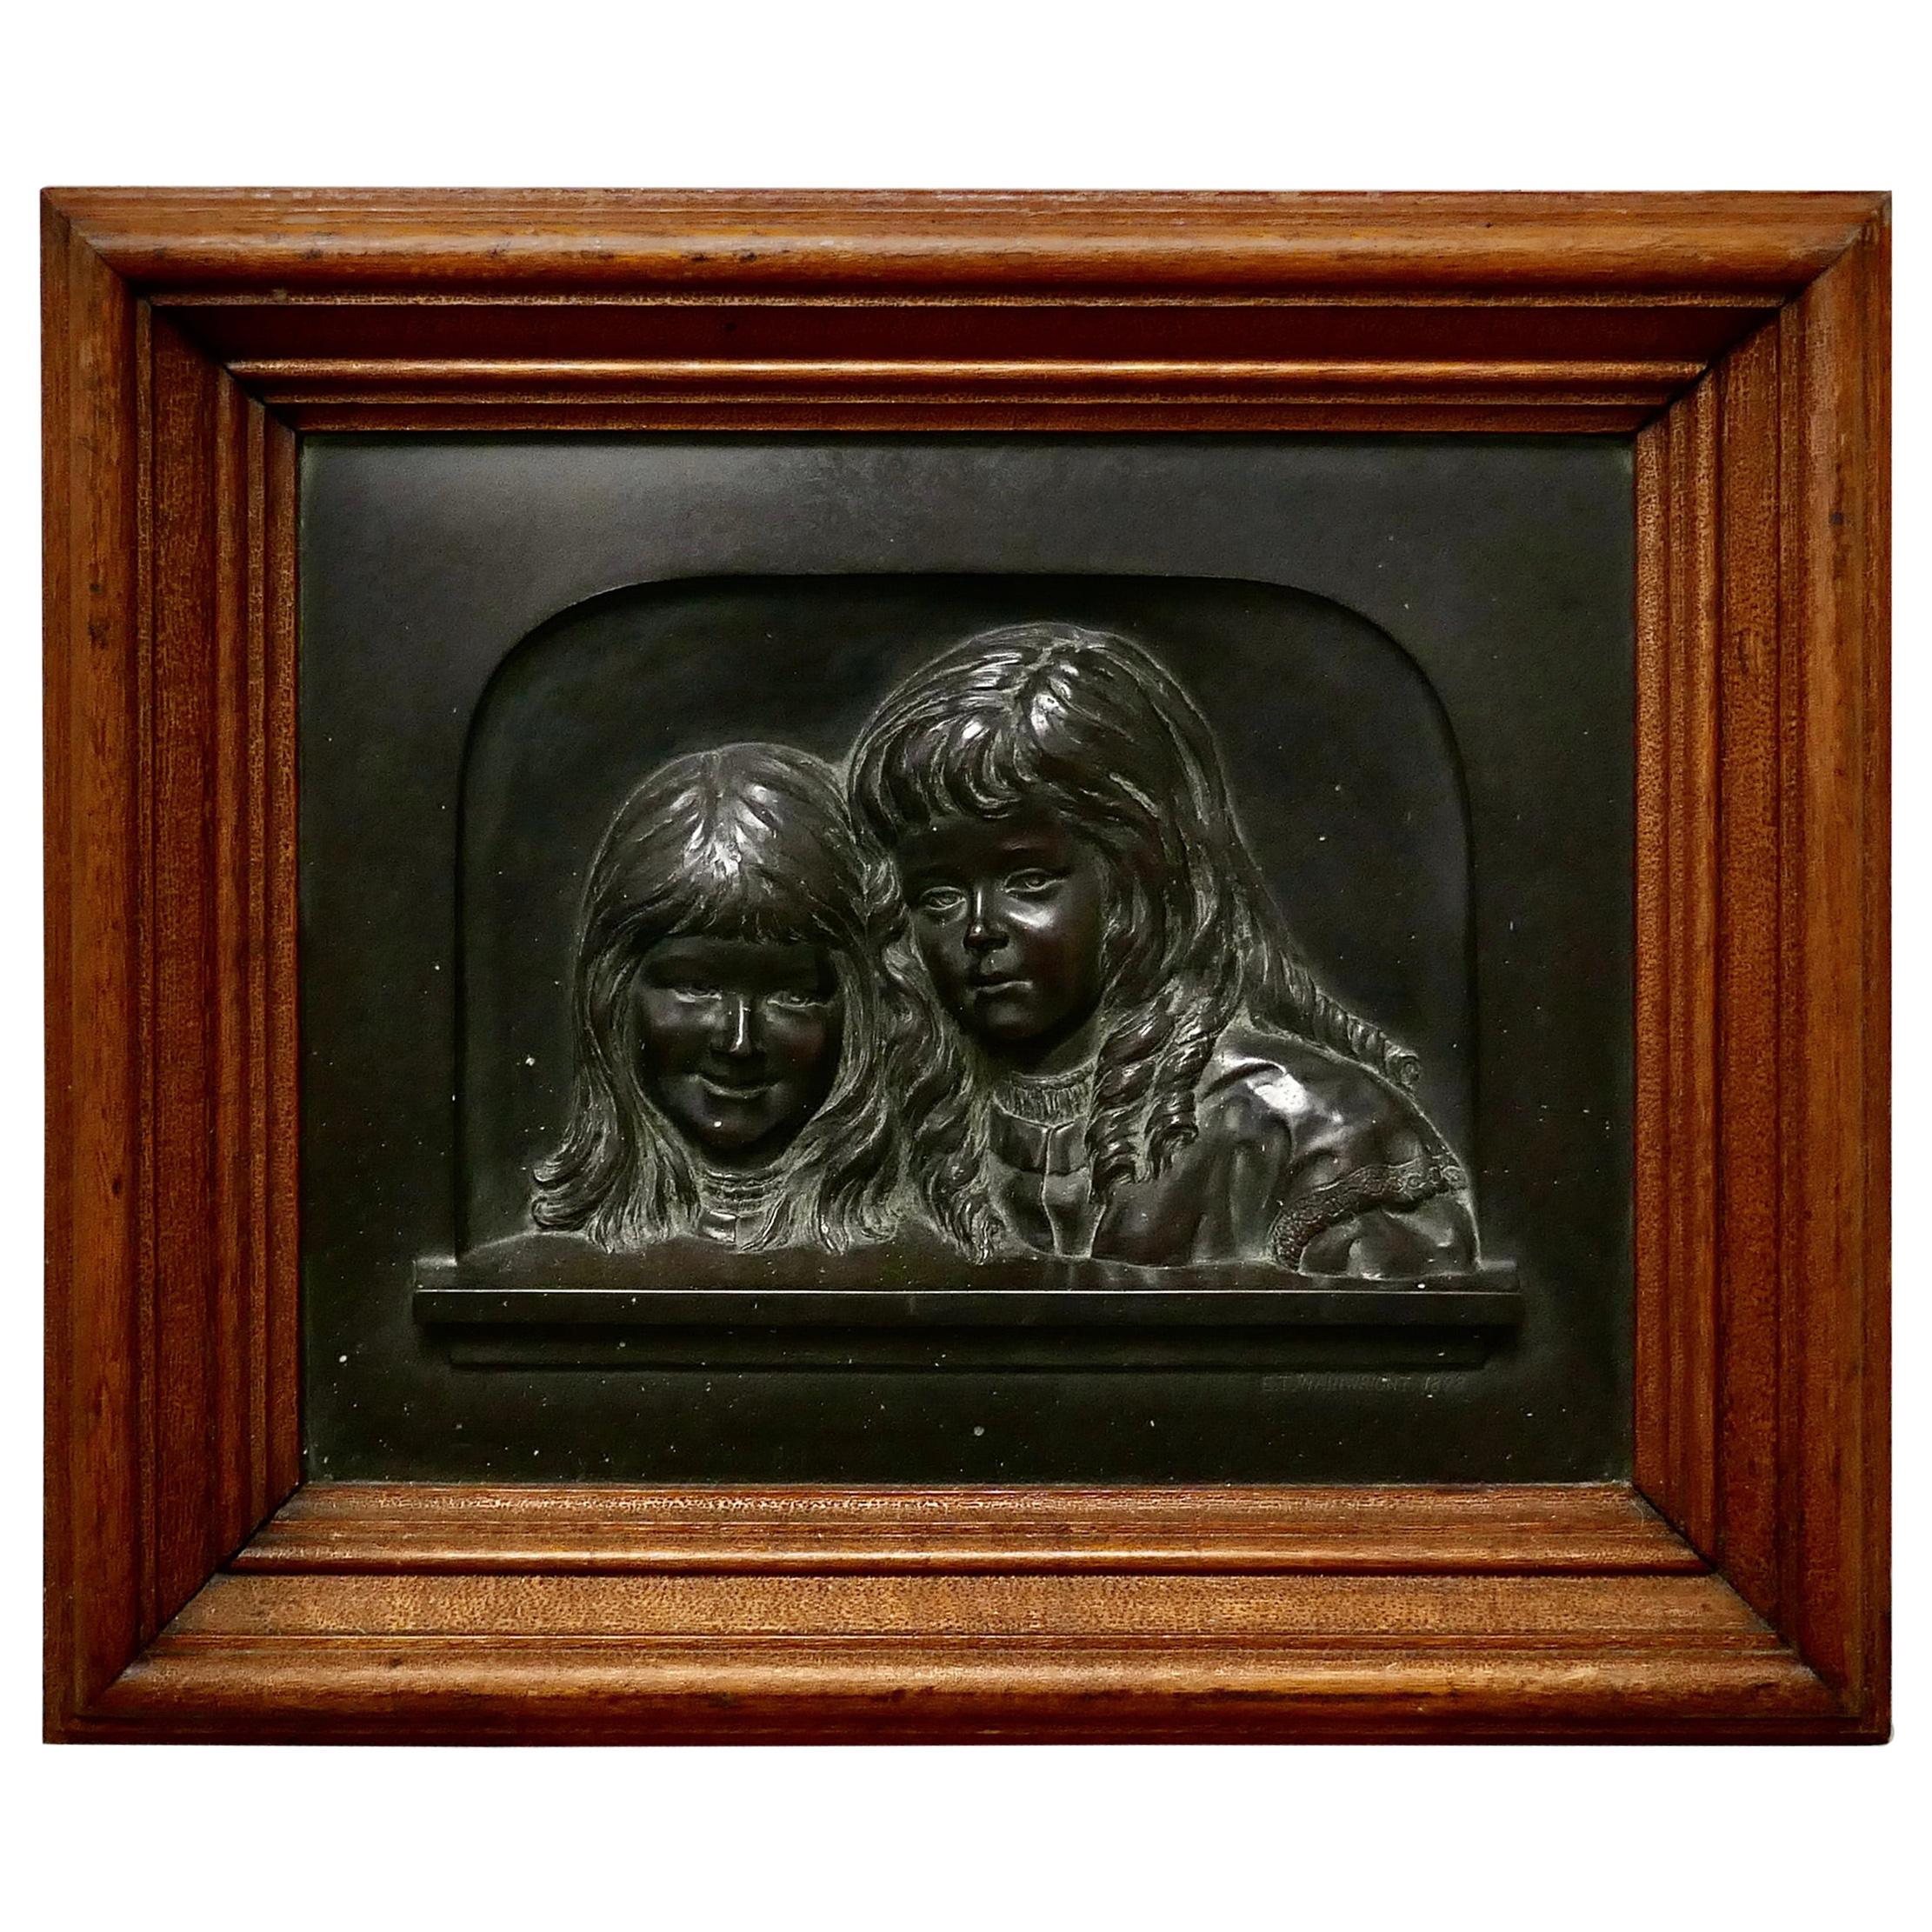 Heavy Bronze Relief Wall Plaque, “Sisters” by E T Wainwright 1898